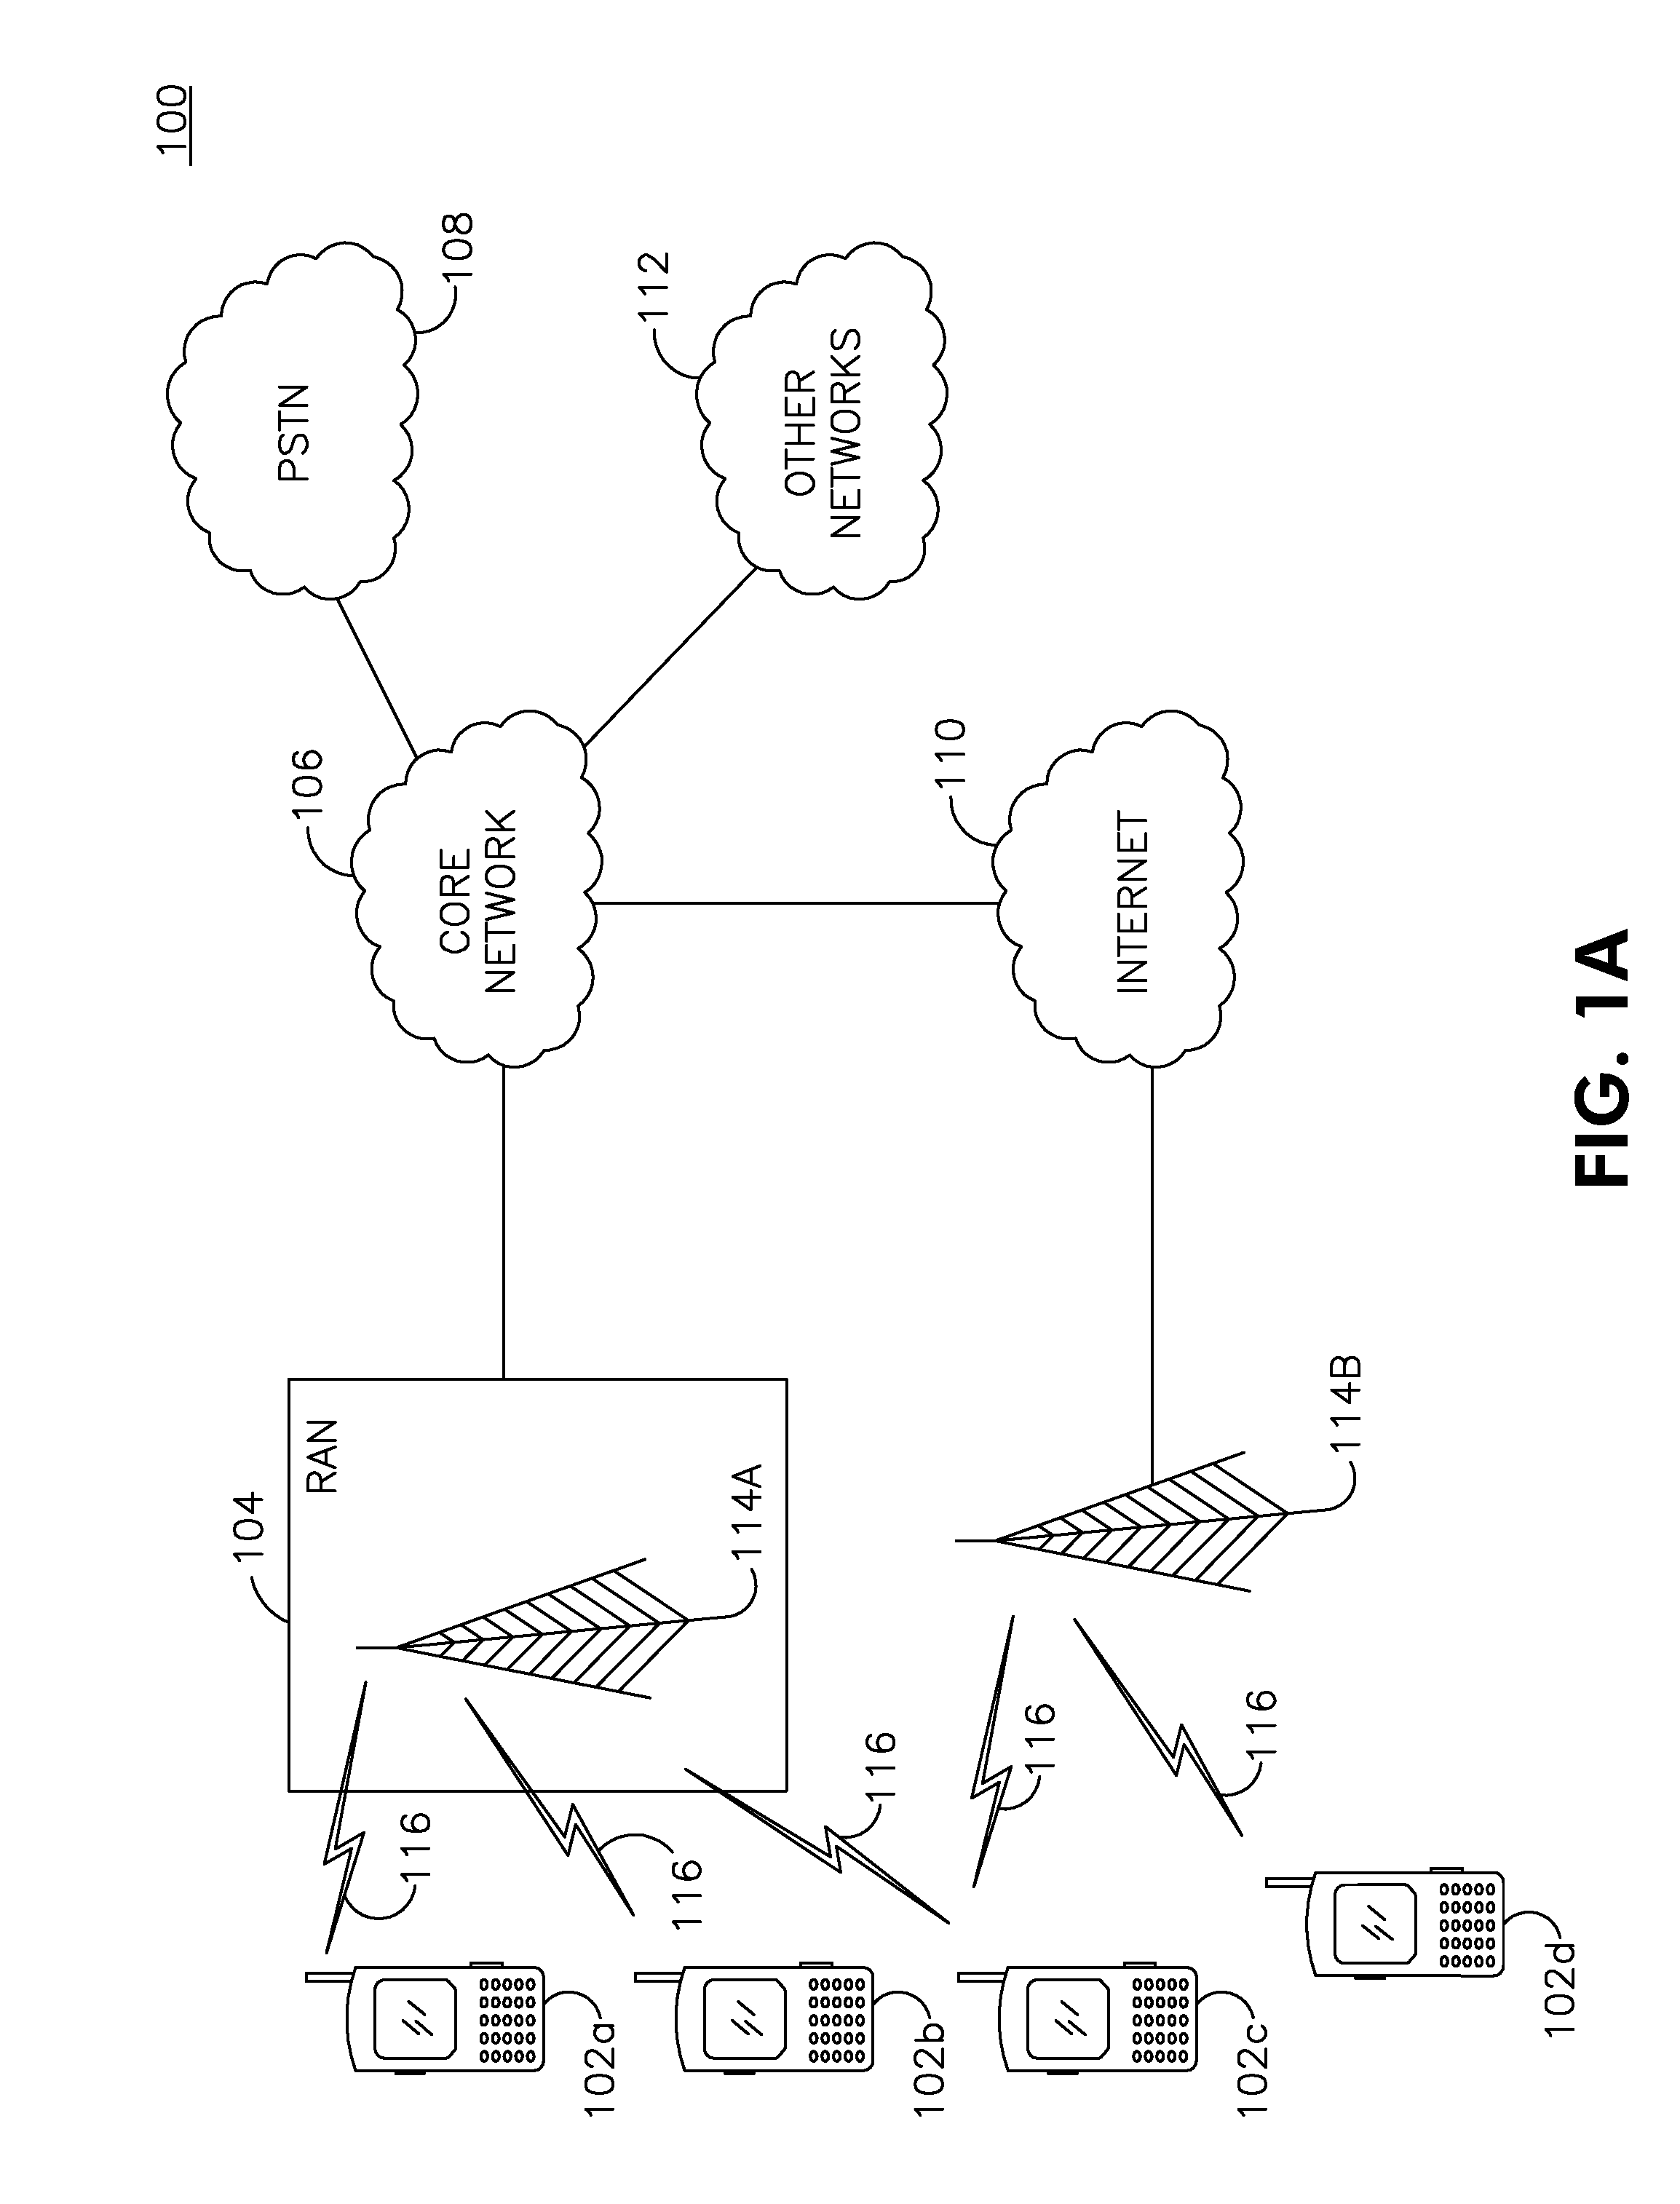 Power control for devices having multiple antennas